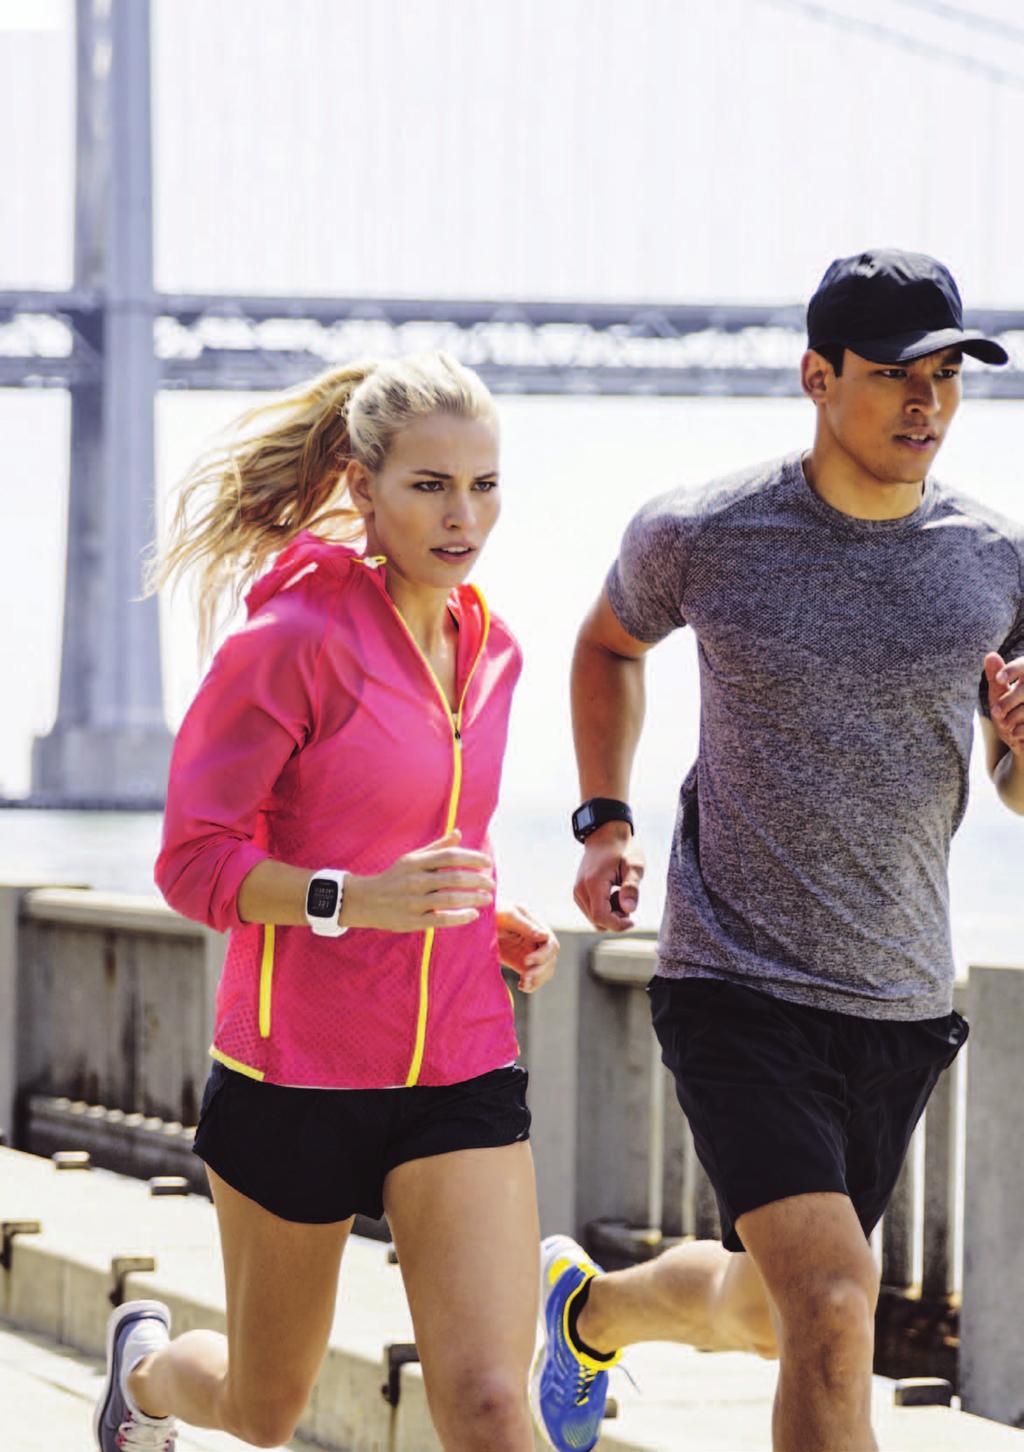 Run beyond ordinary Polar M400 brings together style, performance and comfort.